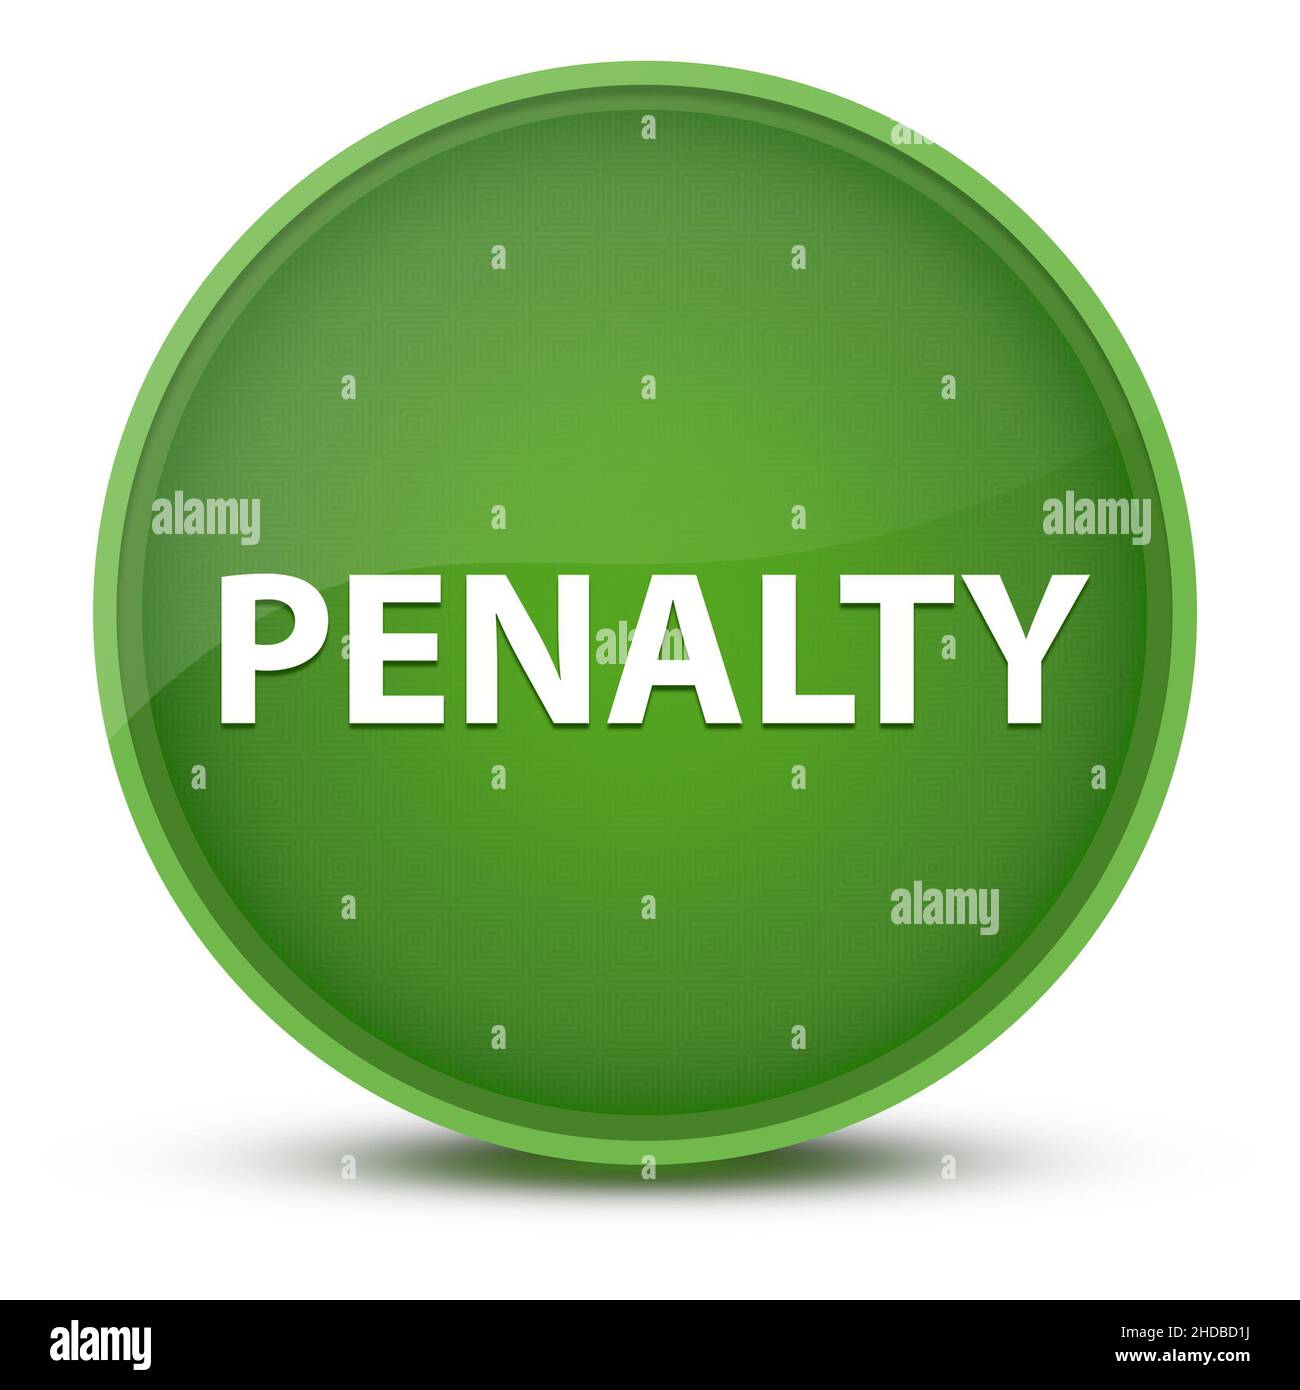 Penalty luxurious glossy green round button abstract illustration Stock Photo